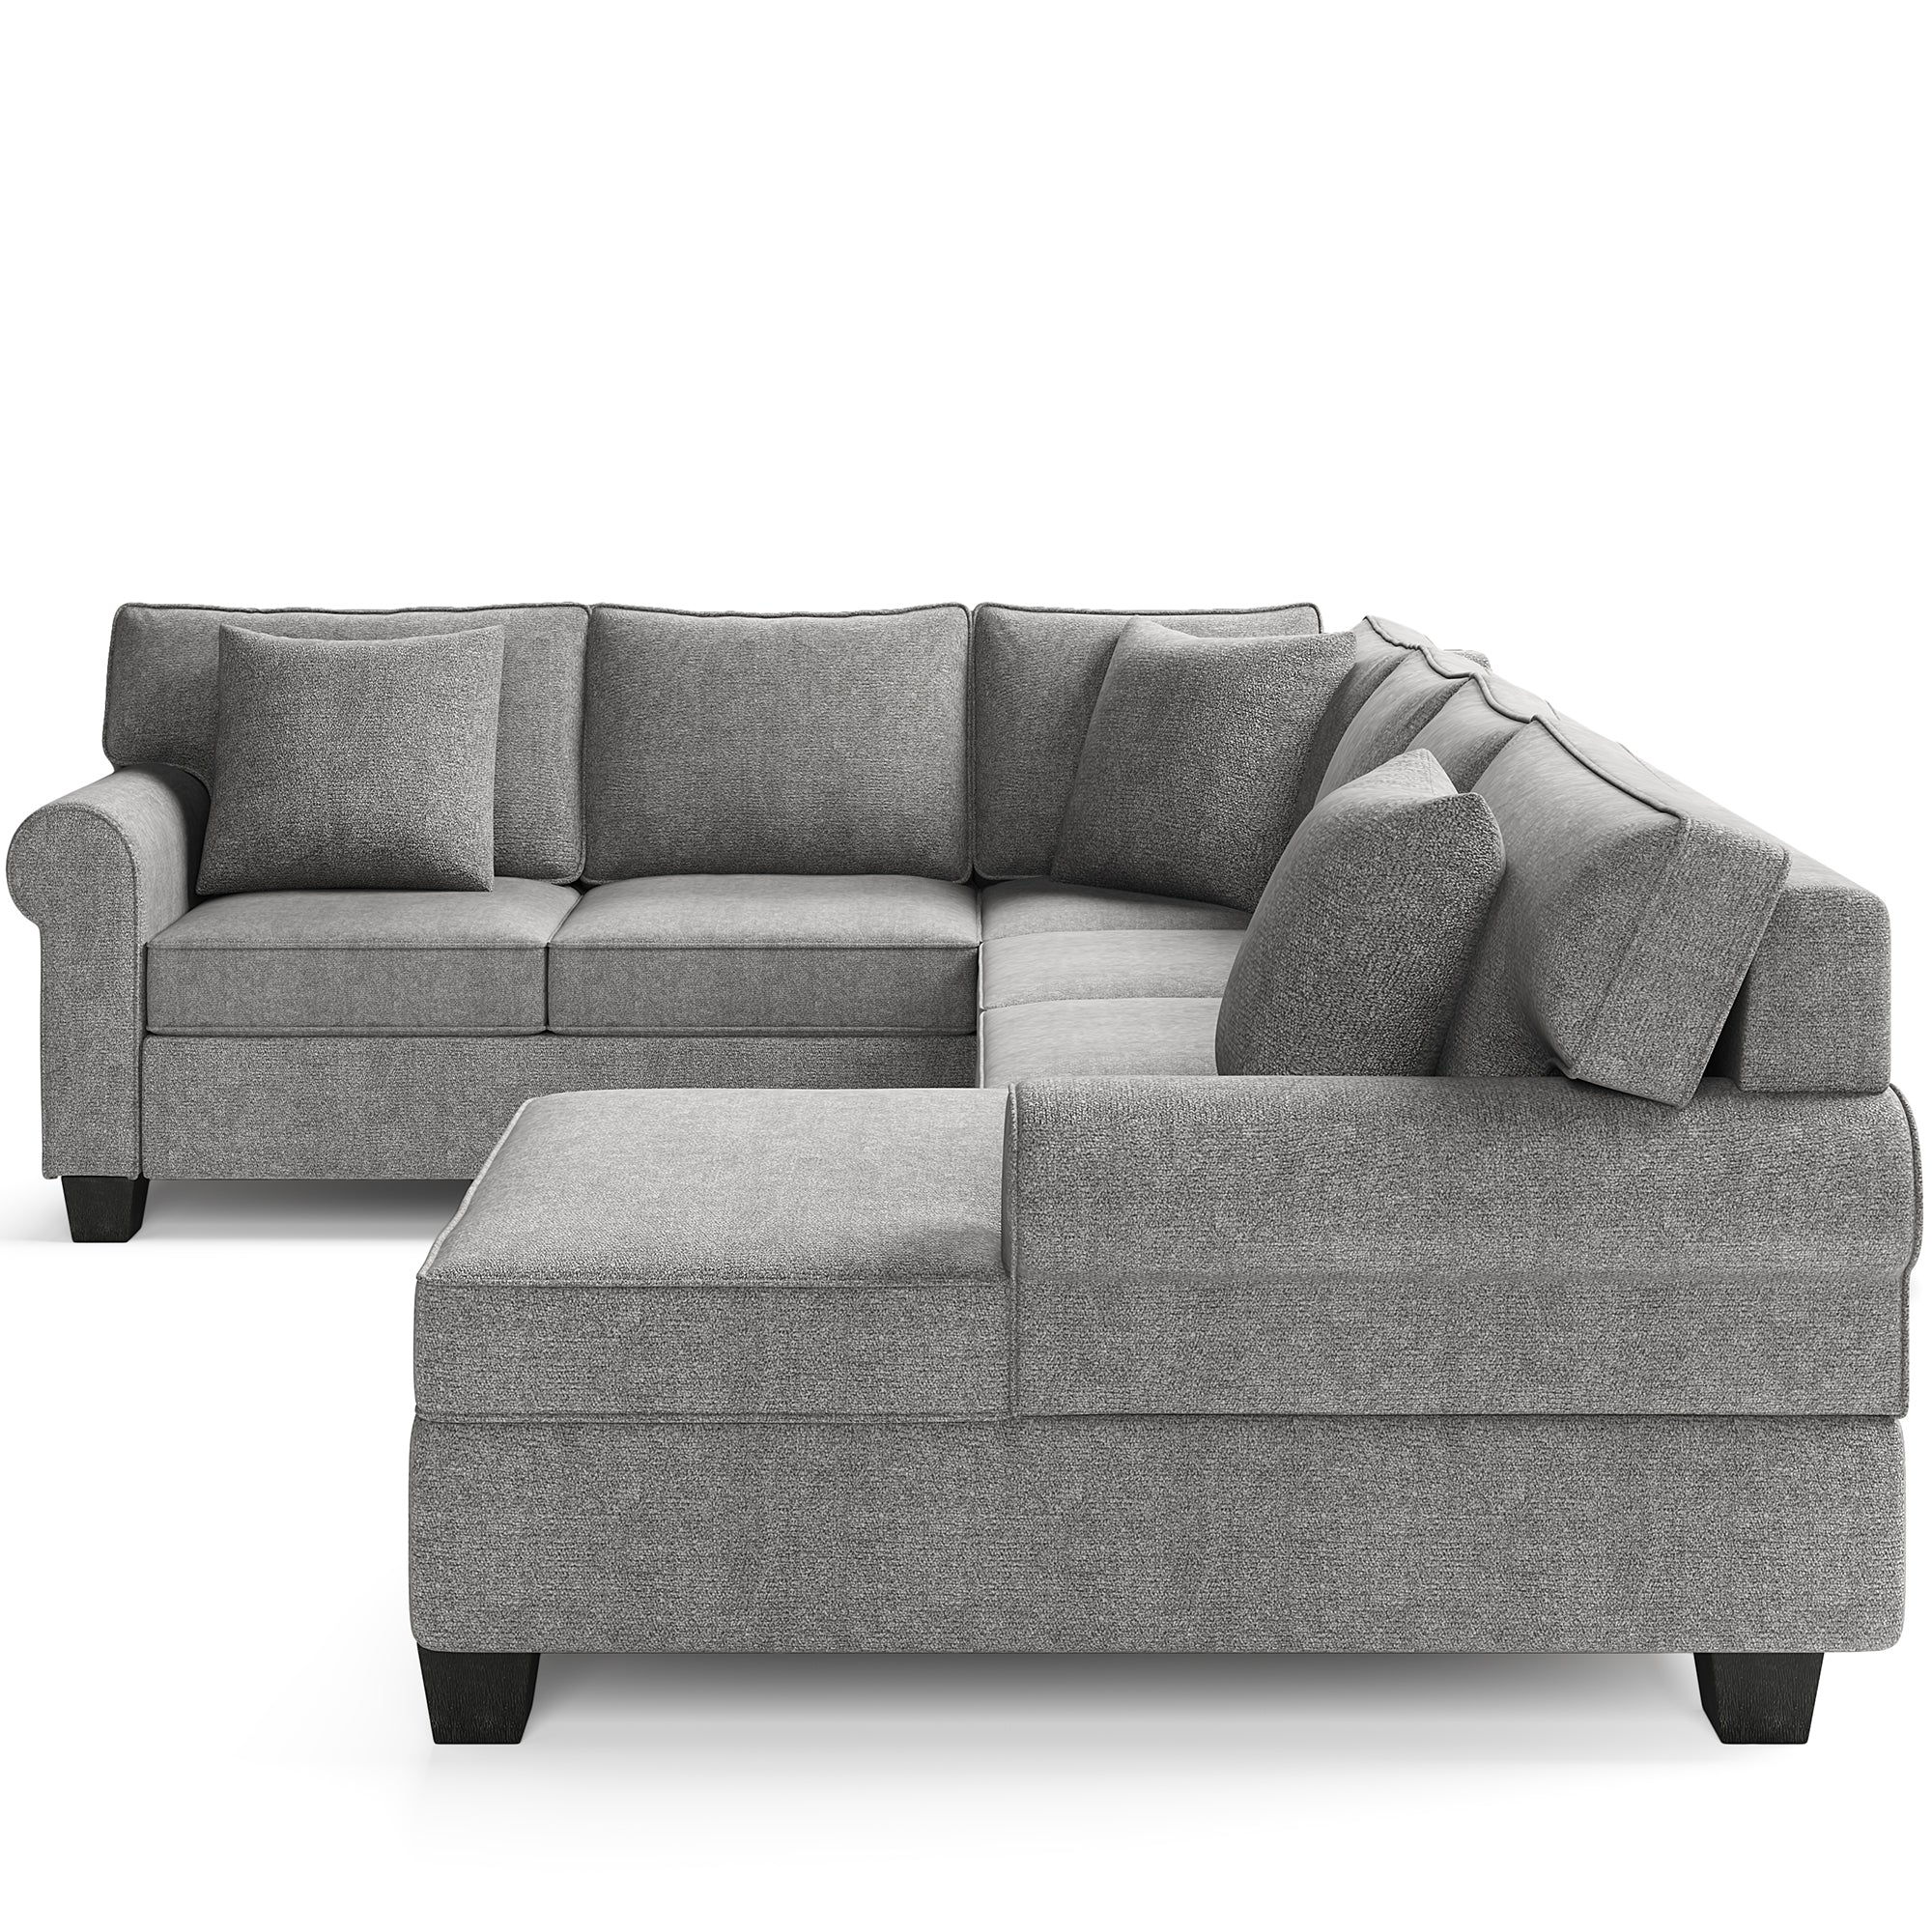  Classic Chesterfield Sectional Sofa